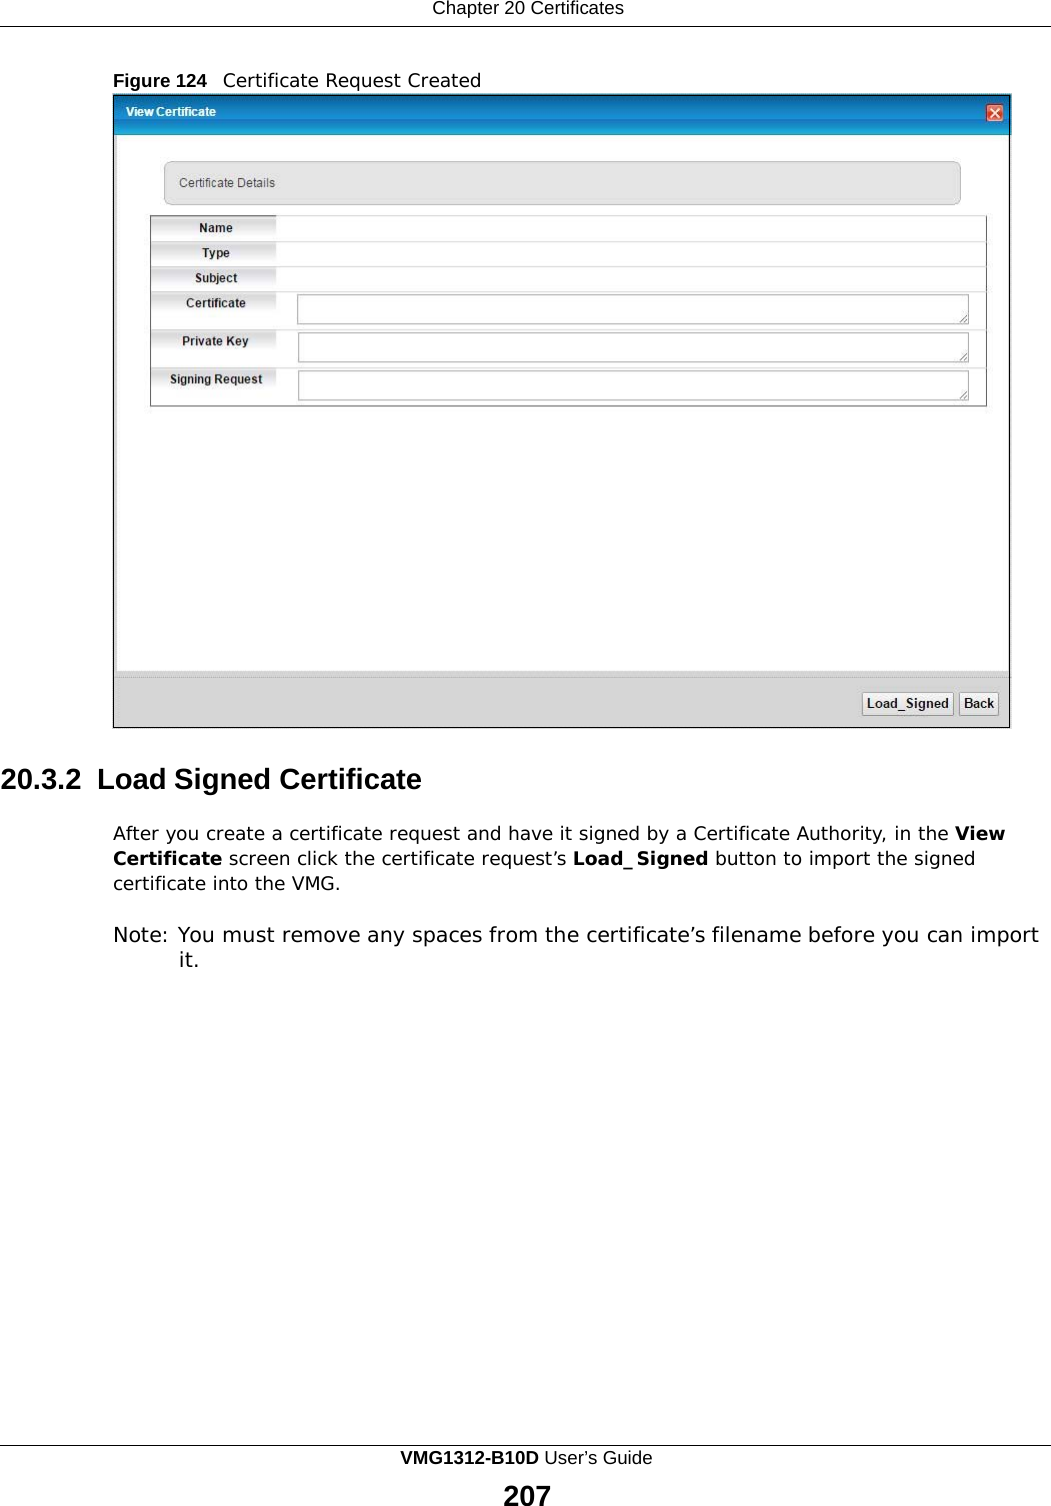 Chapter 20 Certificates      Figure 124   Certificate Request Created                                 20.3.2 Load Signed Certificate  After you create a certificate request and have it signed by a Certificate Authority, in the View Certificate screen click the certificate request’s Load_Signed button to import the signed certificate into the VMG.  Note: You must remove any spaces from the certificate’s filename before you can import it. VMG1312-B10D User’s Guide 207  